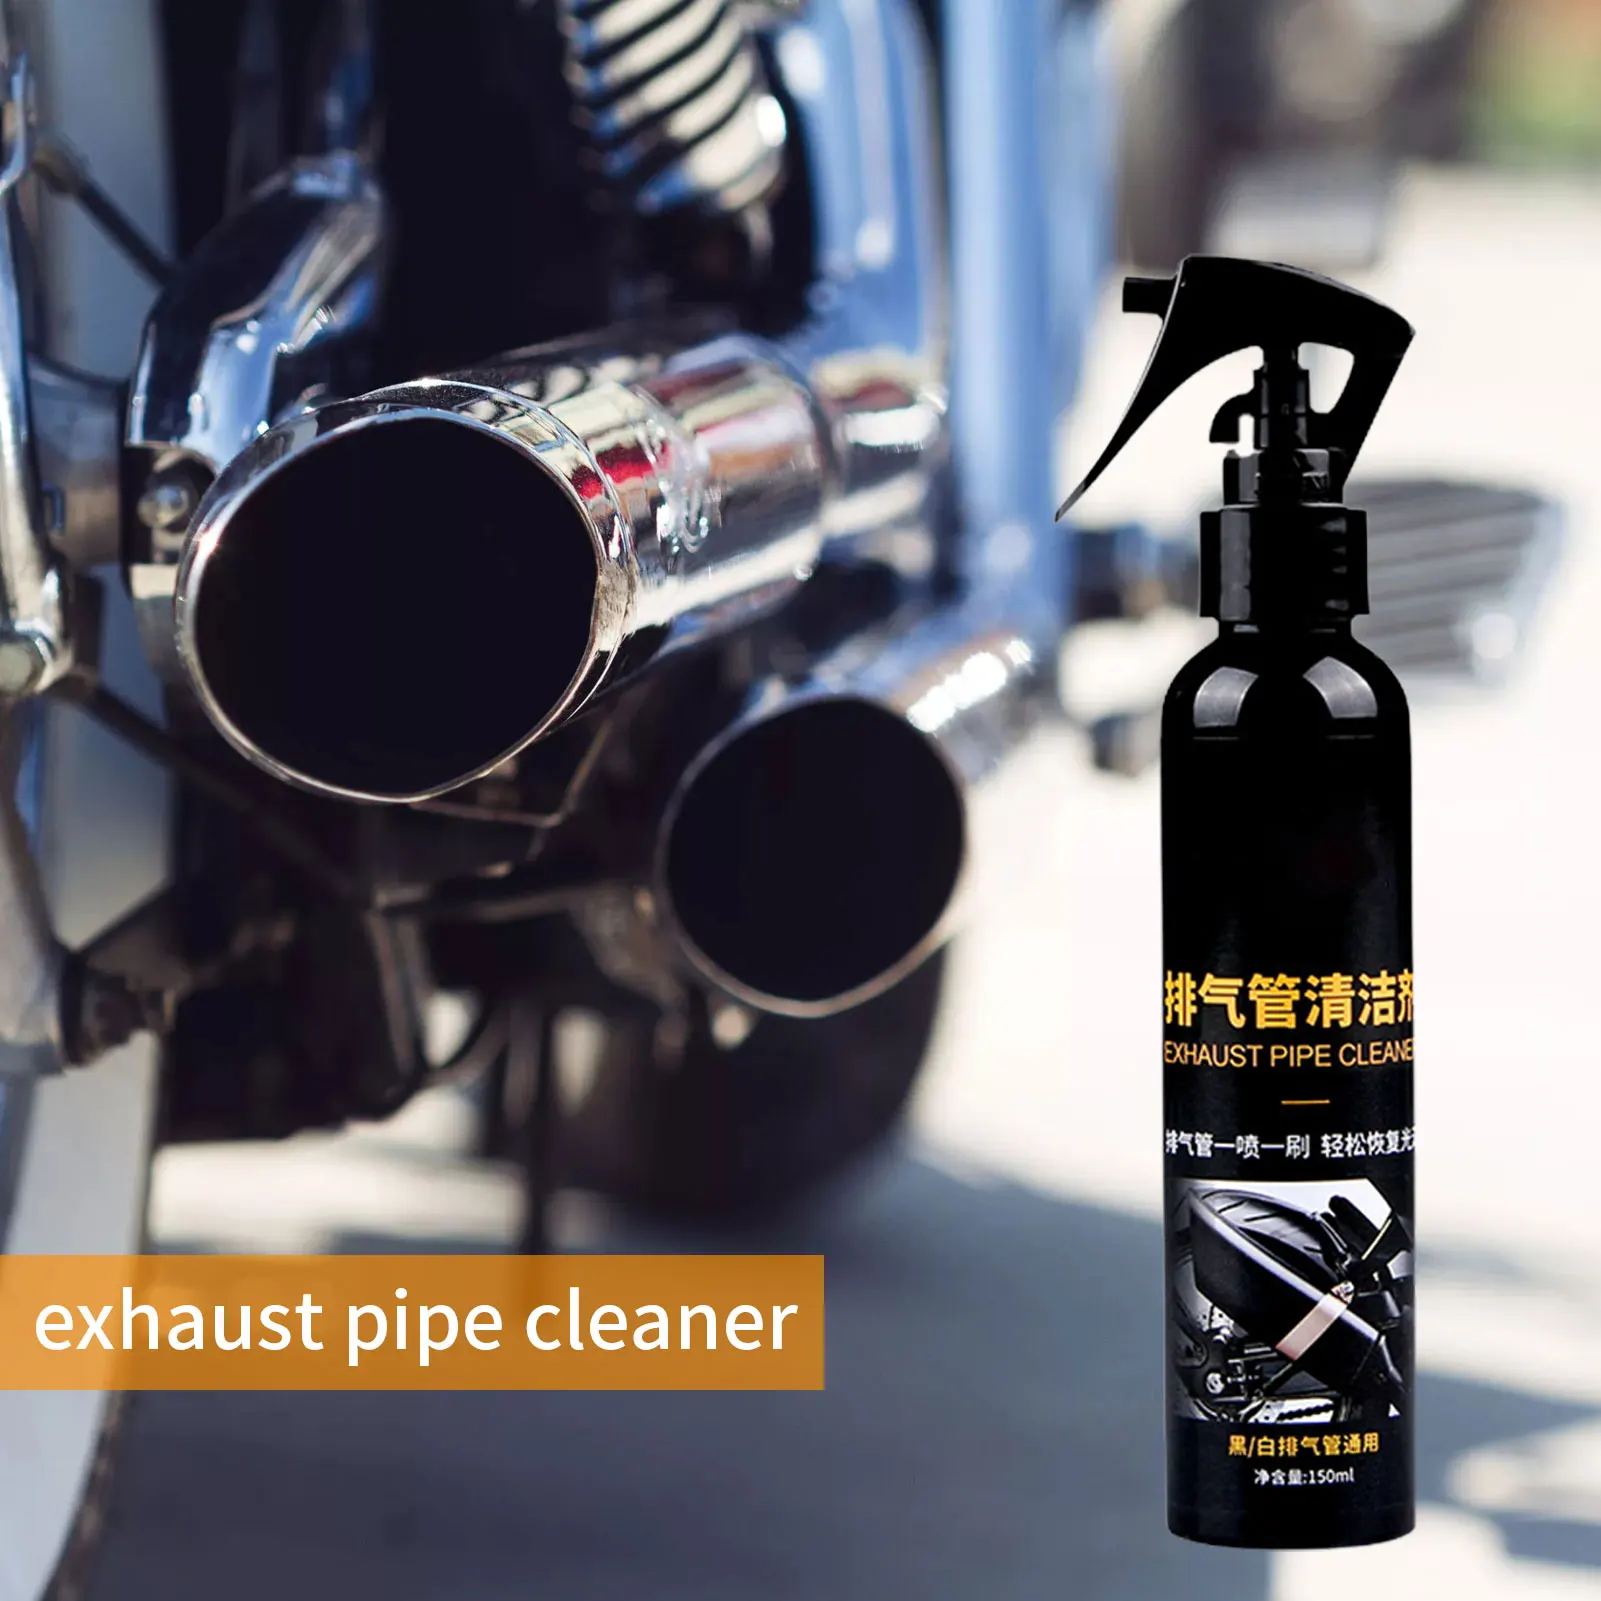 150ml Motorcycle Exhaust Pipe Cleaner Car Repair Motorcycle Paint Equipment Maintenance Paint In Cans Wash Detailing Supplies